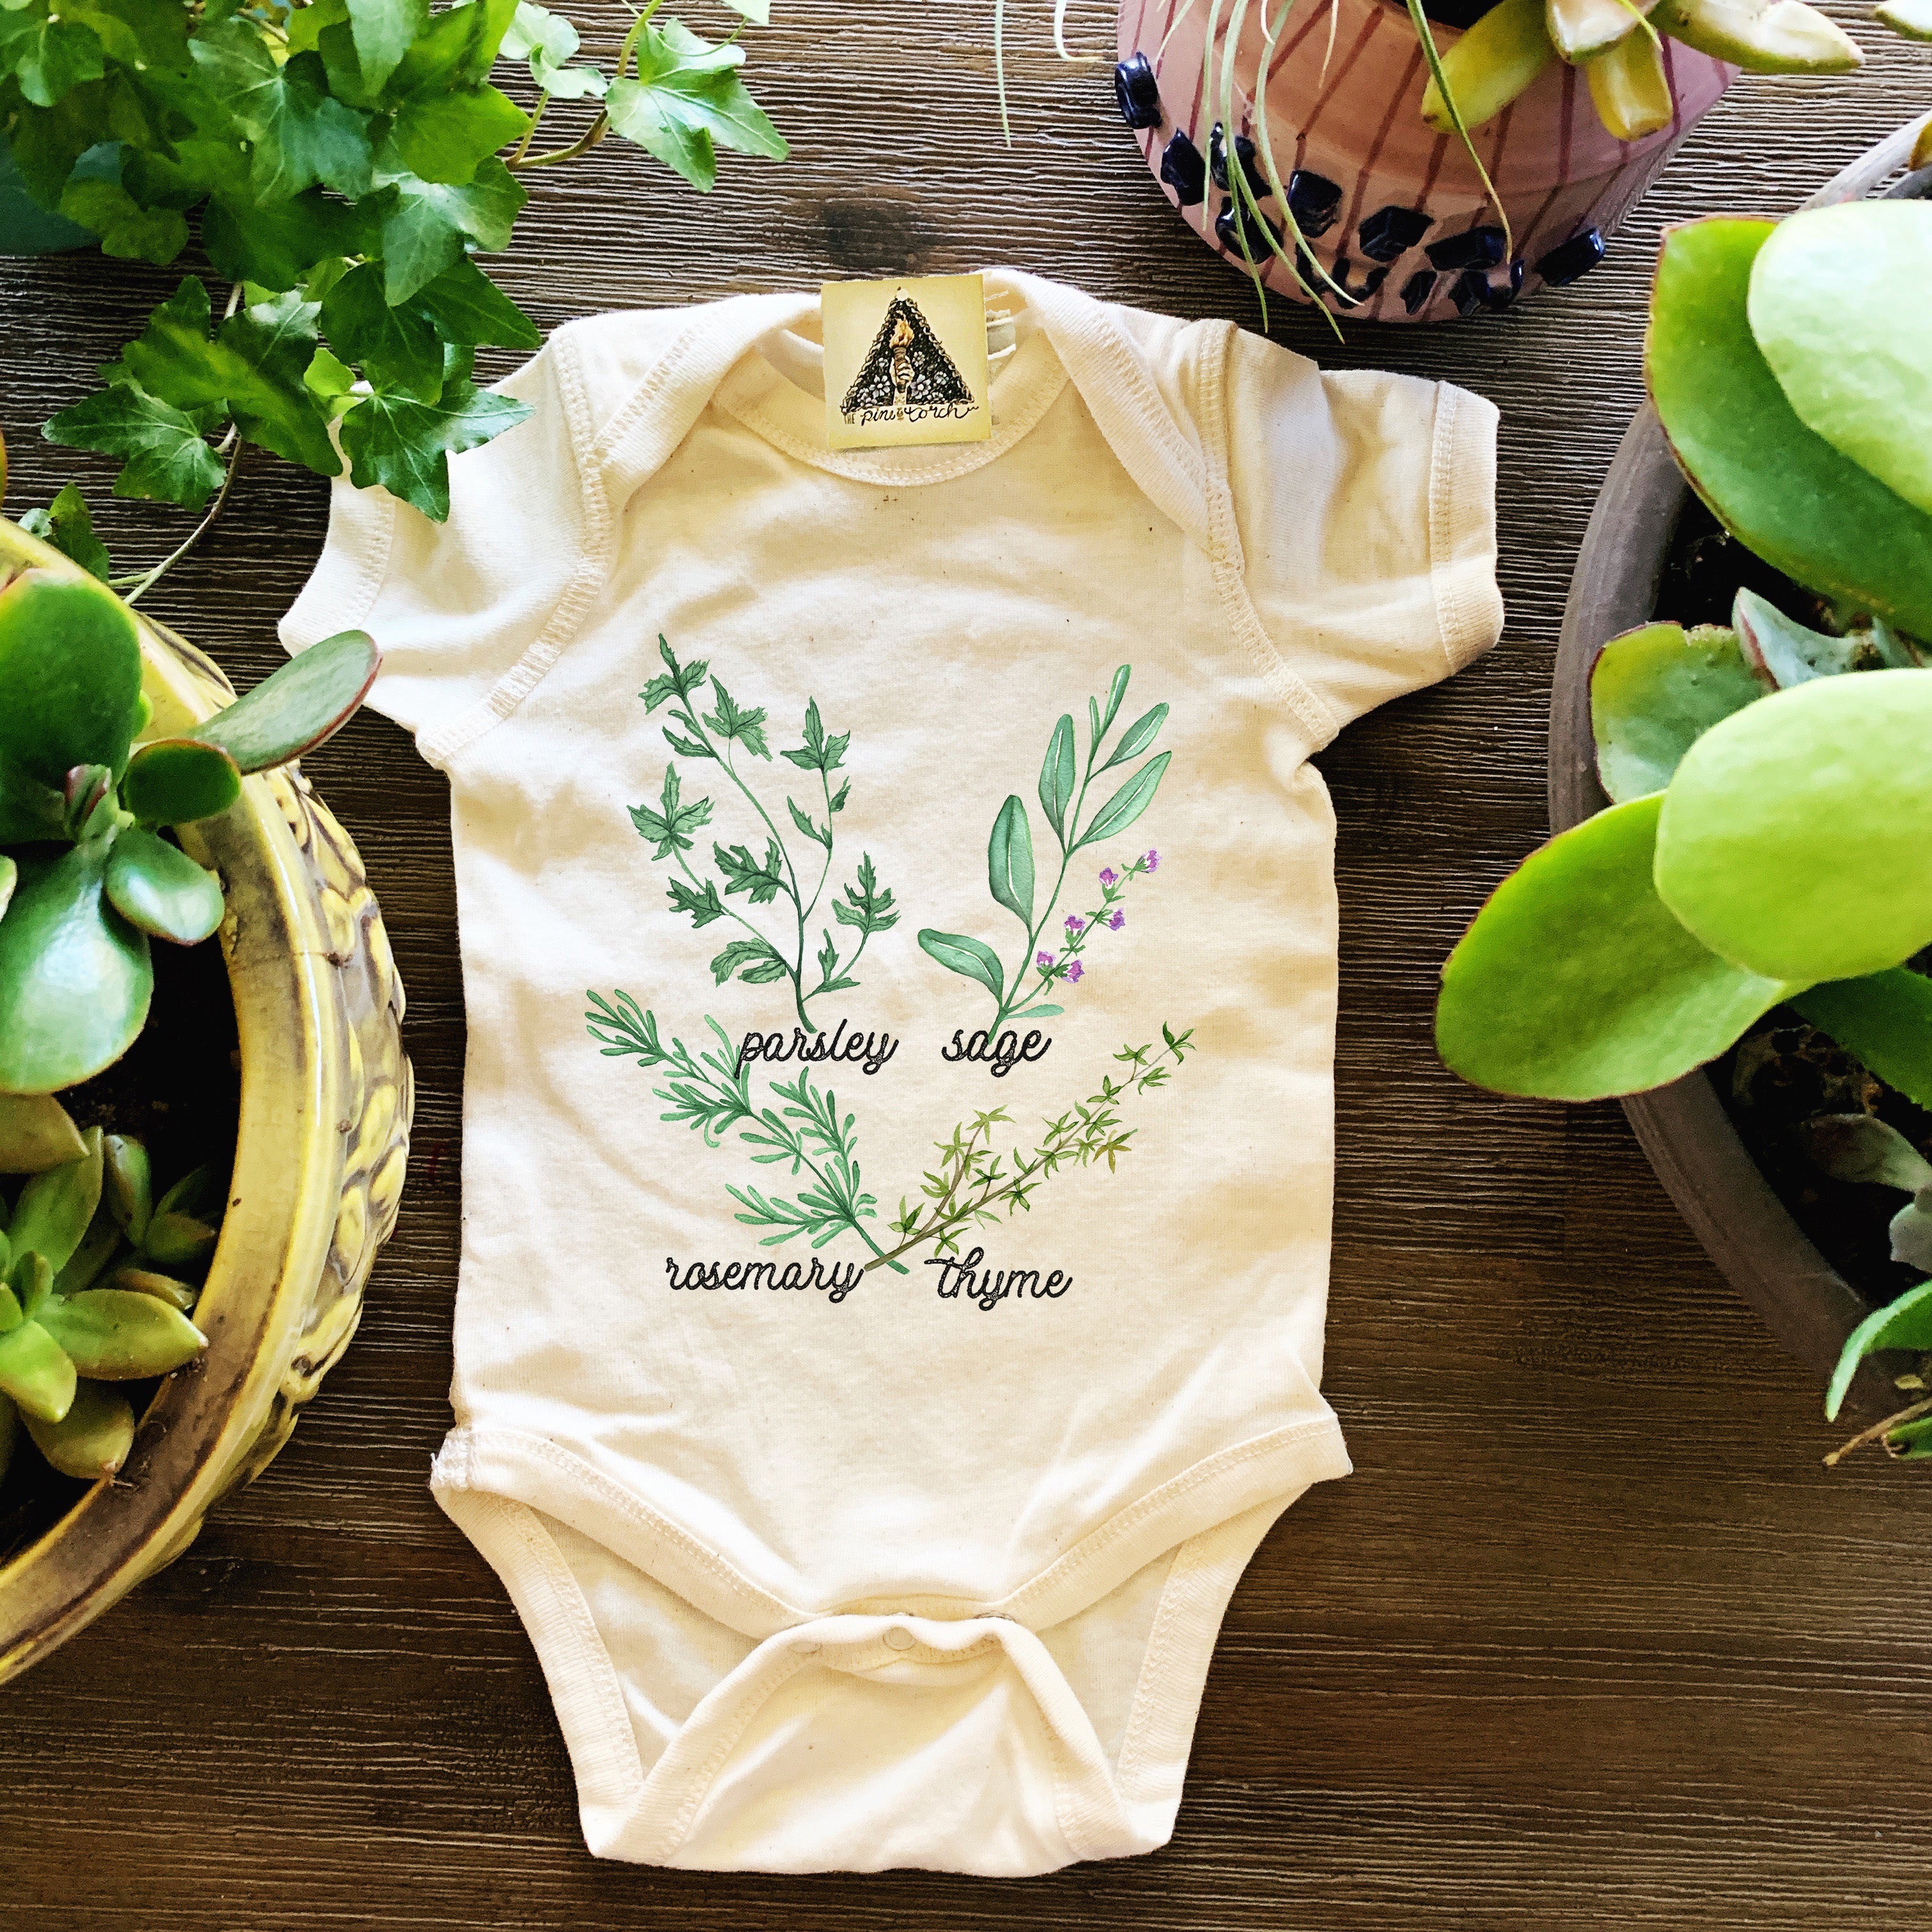 « PARSLEY, SAGE, ROSEMARY, AND THYME » BODYSUIT